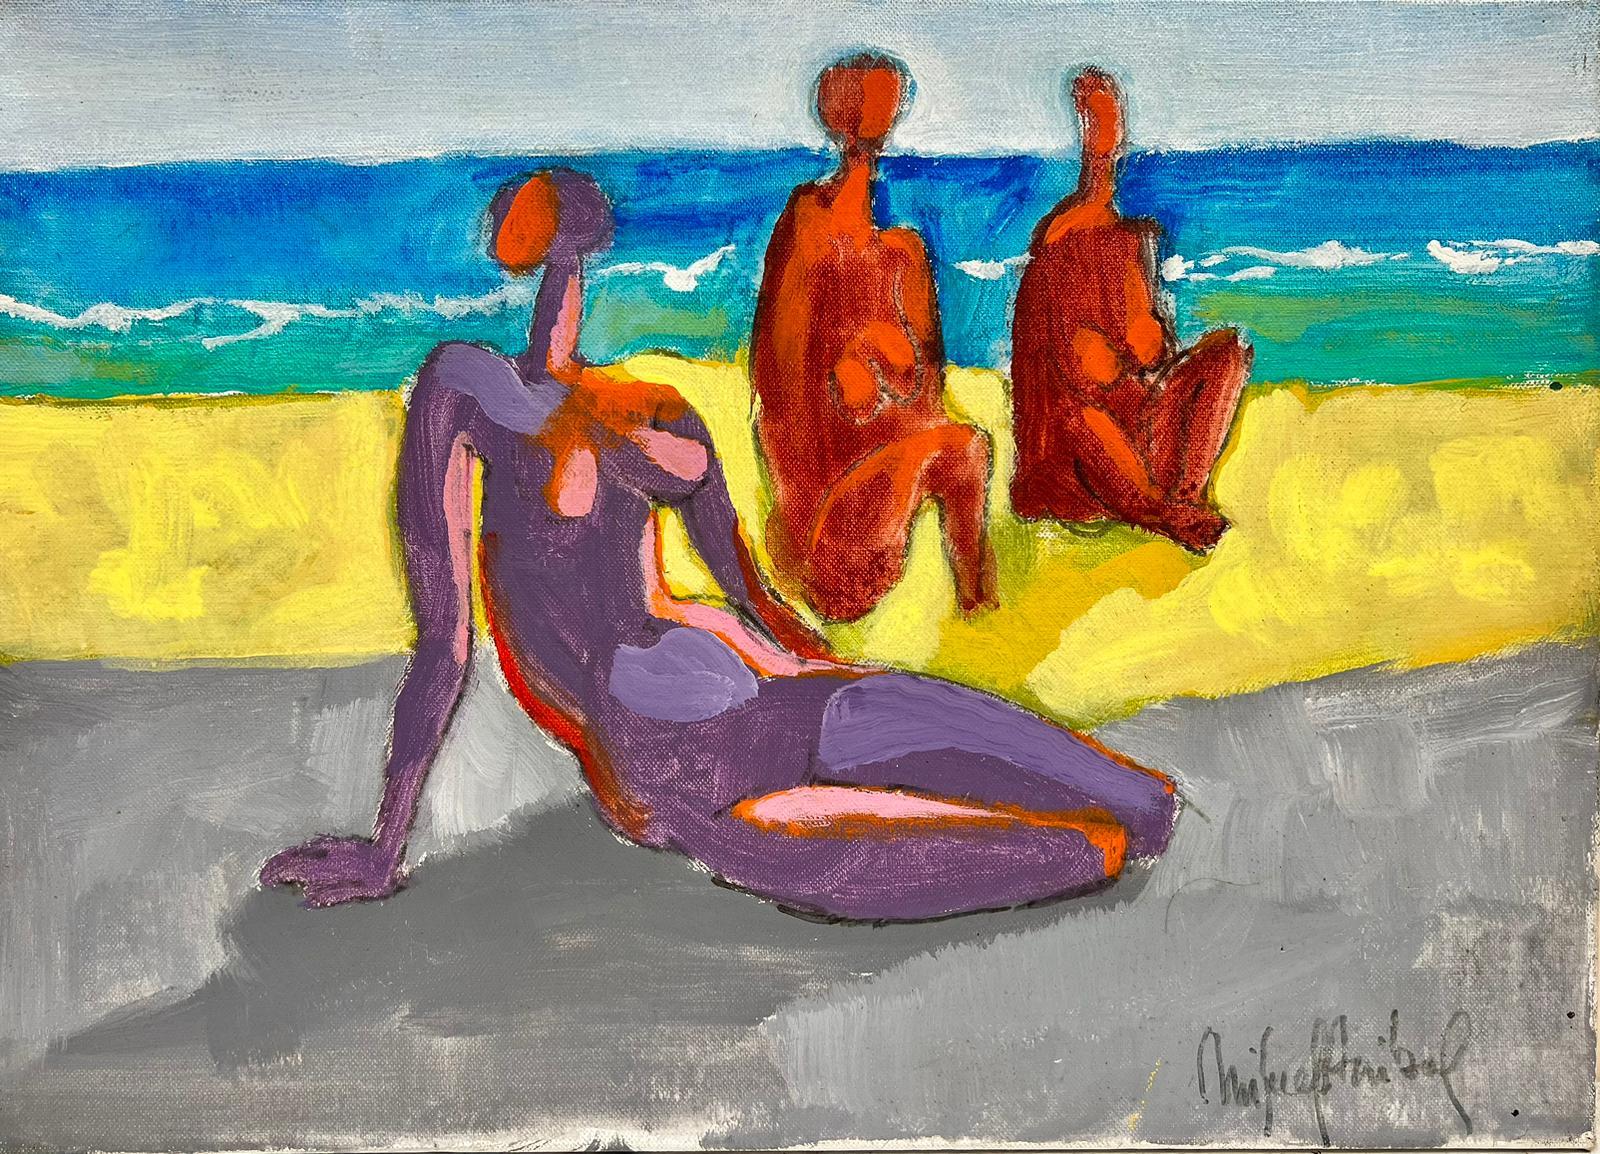 Contemporary Abstract Oil Painting Nude Figures on Sunny Beach, Chilean Artist